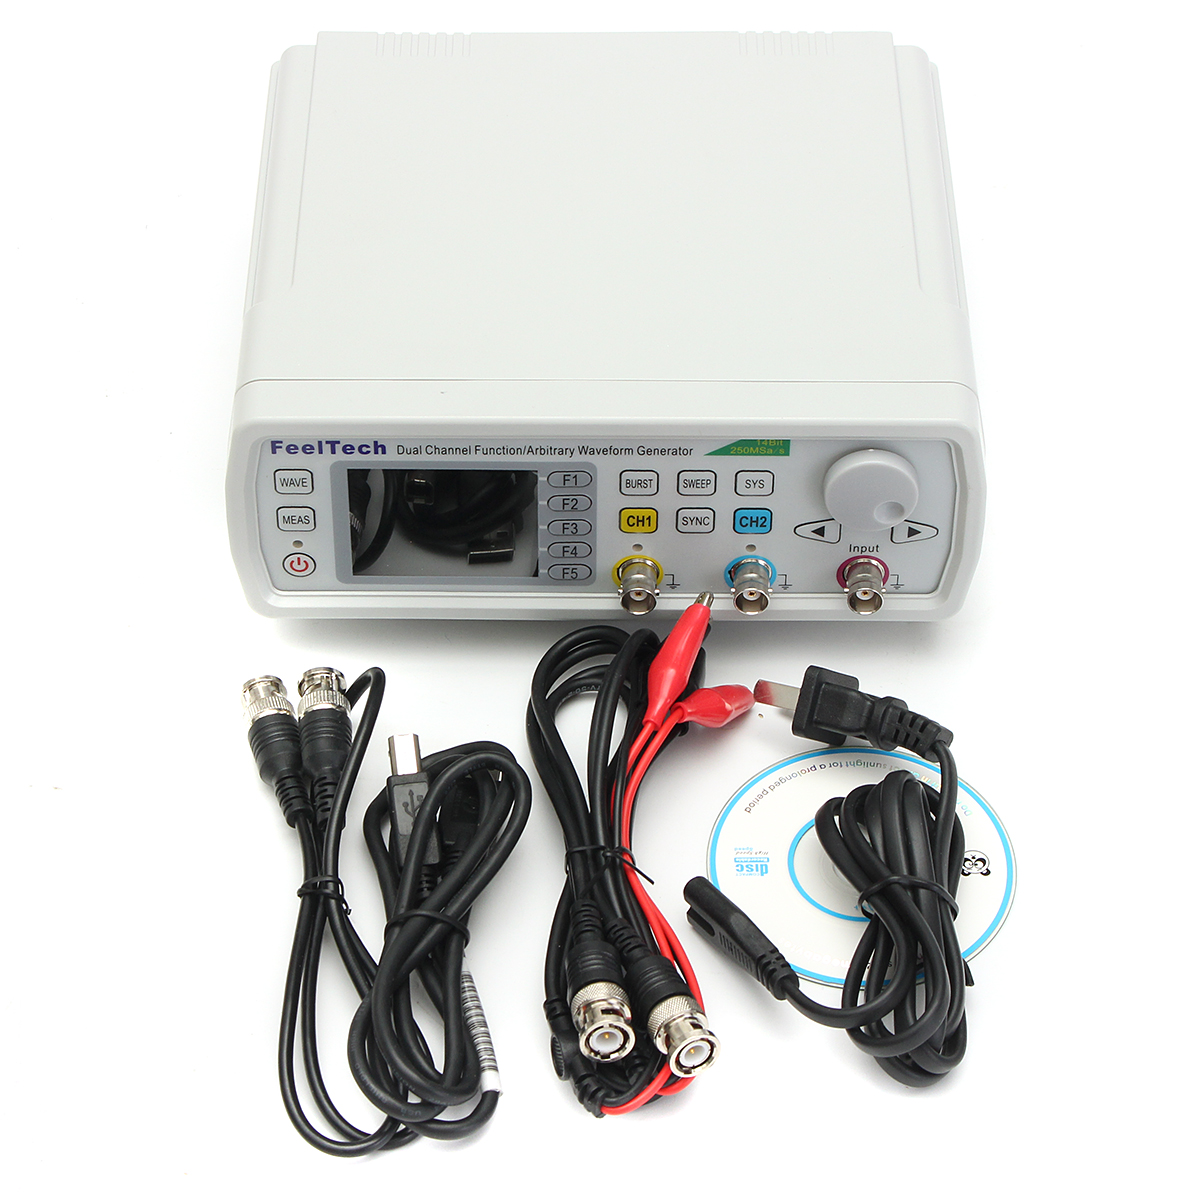 FY6600-Digital-30MHz-60MHz-Dual-Channel-DDS-Function-Arbitrary-Waveform-Signal-Generator-Frequency-M-1957884-9